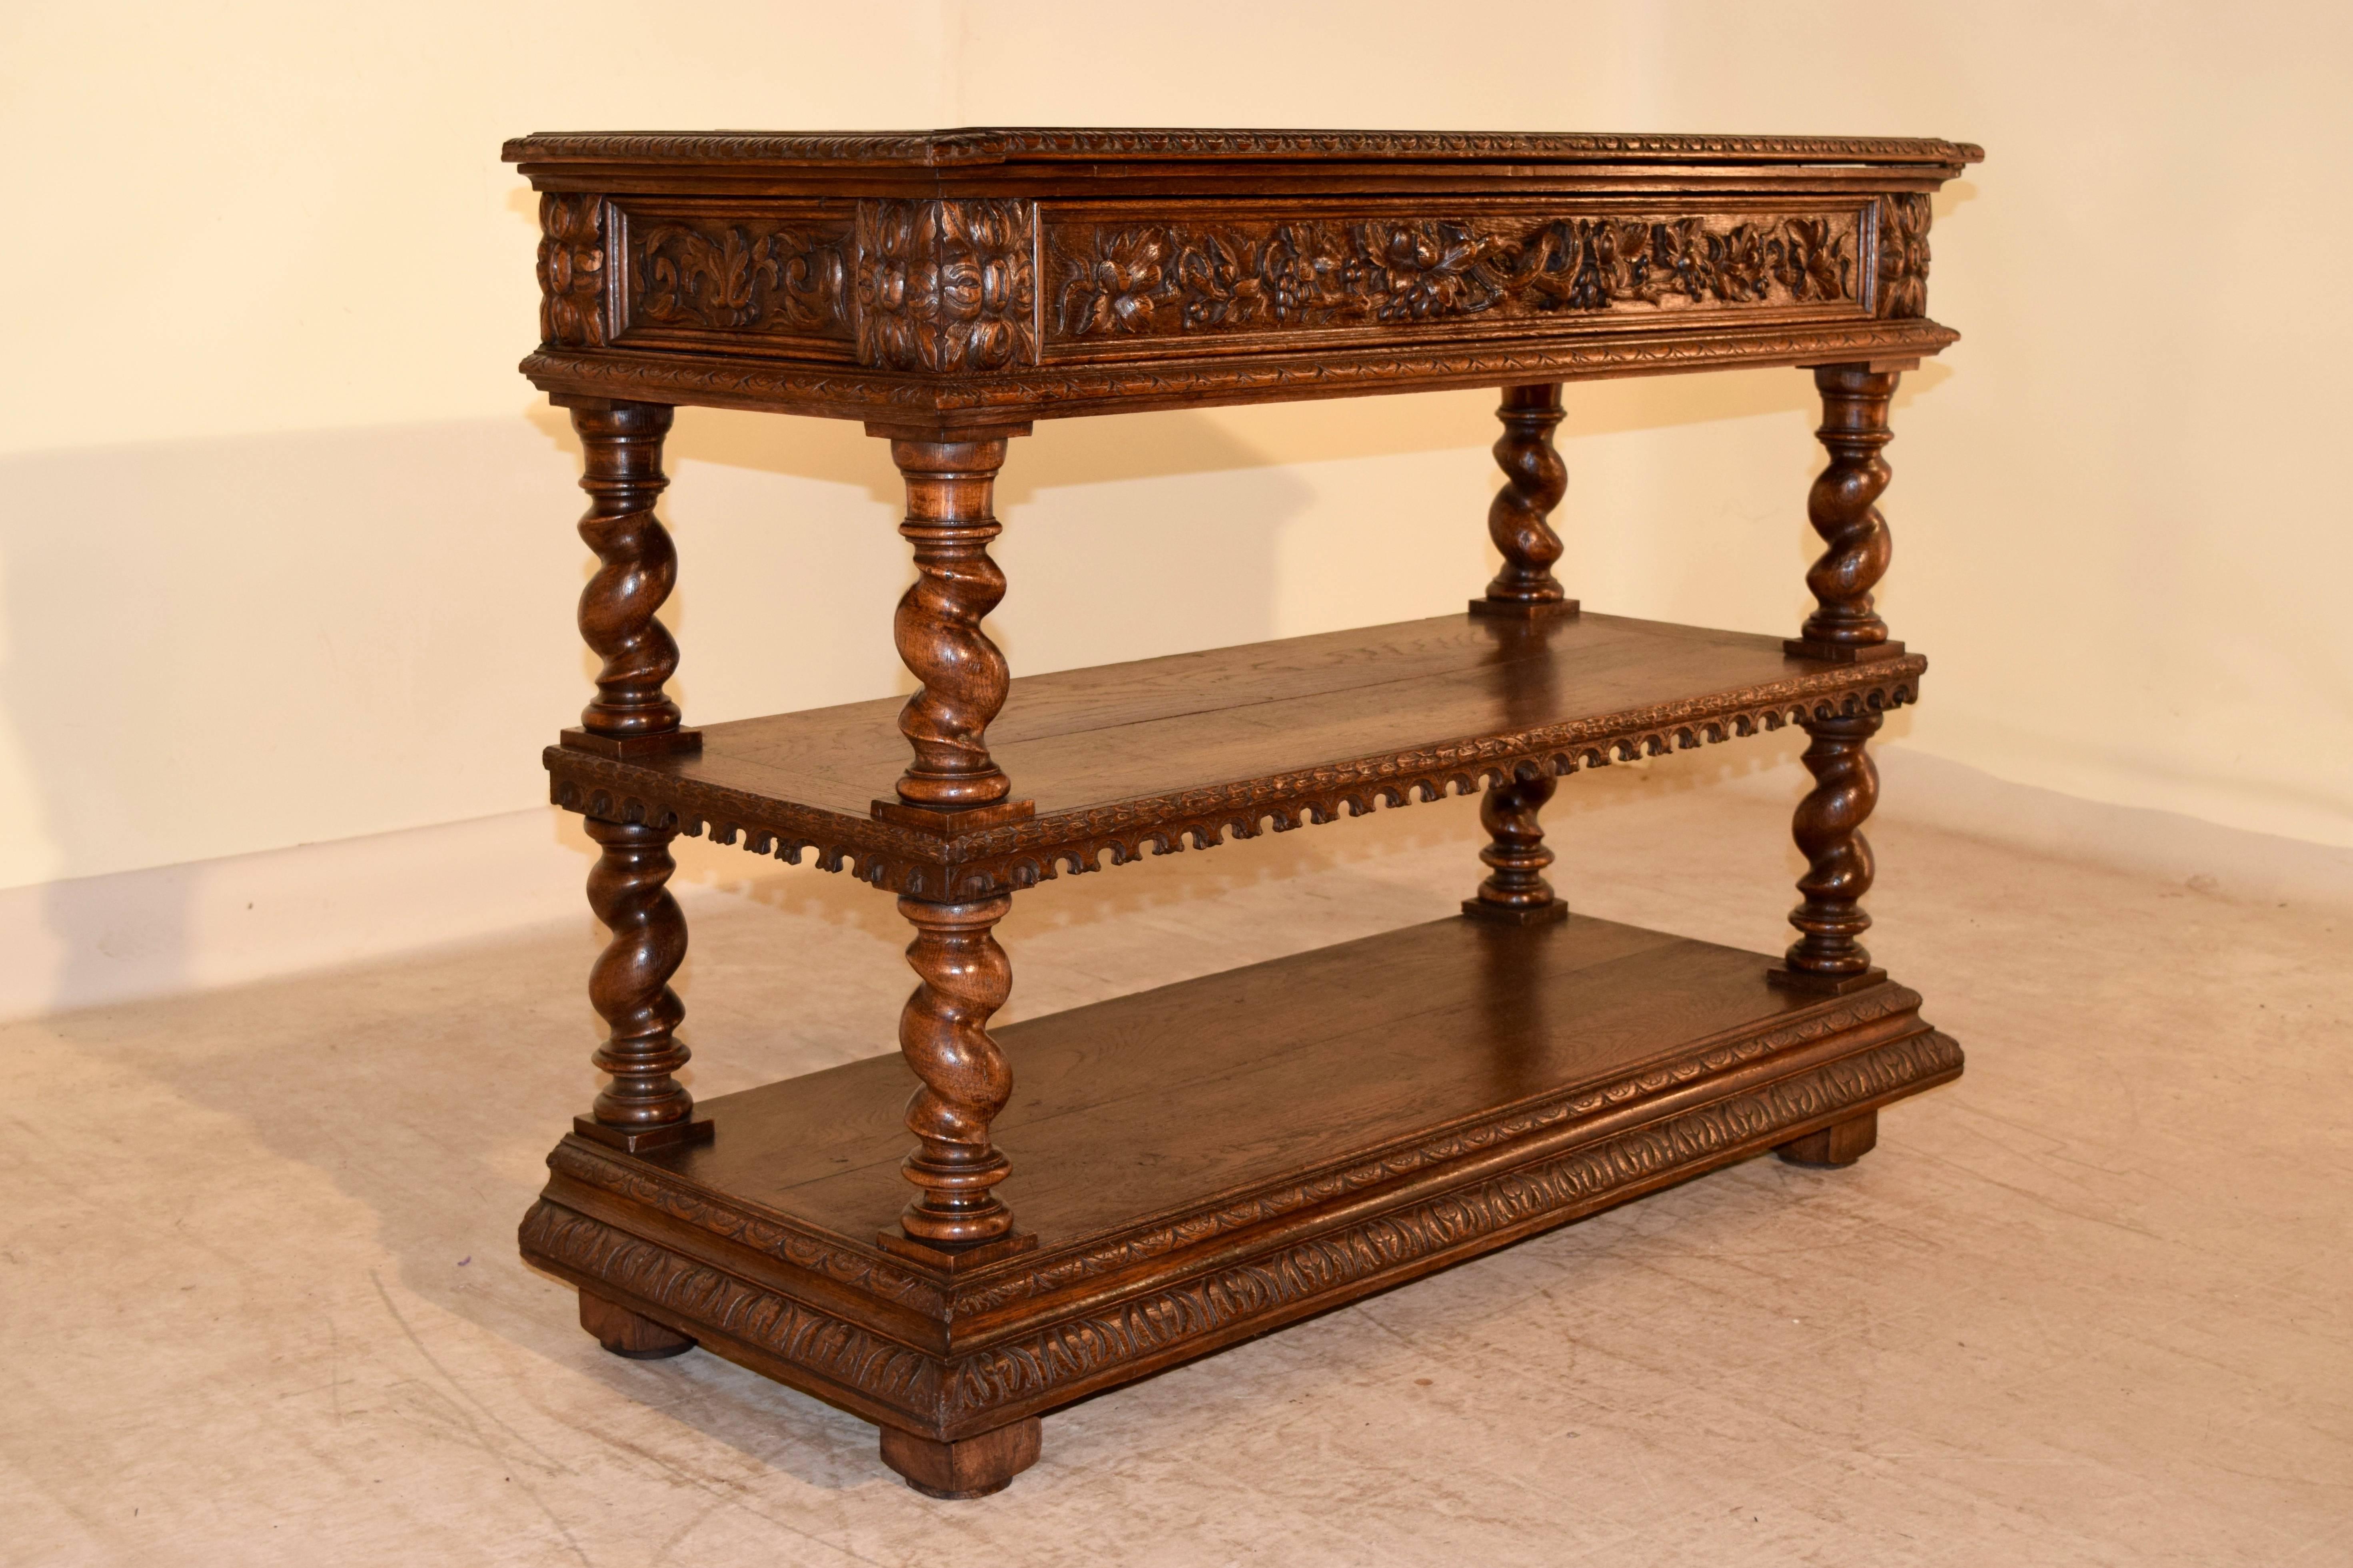 19th century French dessert buffet with a beveled and gadrooned edge around the top, which also is hinged and lifts to reveal a wood serving surface. The apron has hand-carved panels with leaves and grapes on the sides and drawer front, and also has